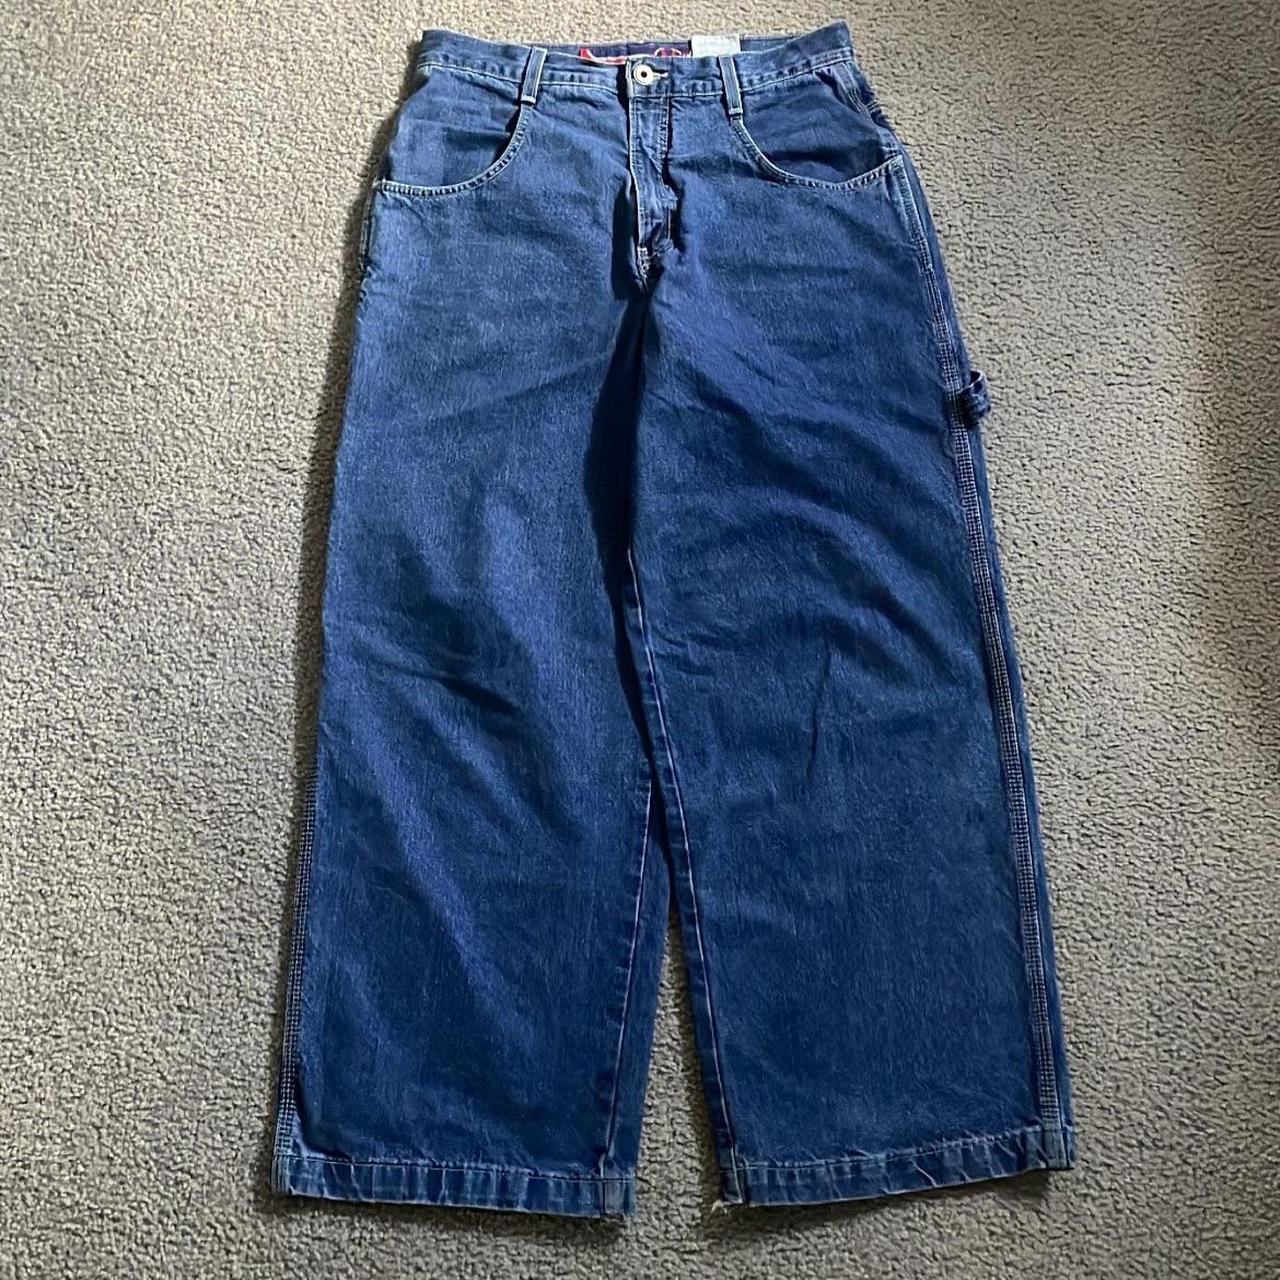 JNCO Men's Blue and White Jeans | Depop